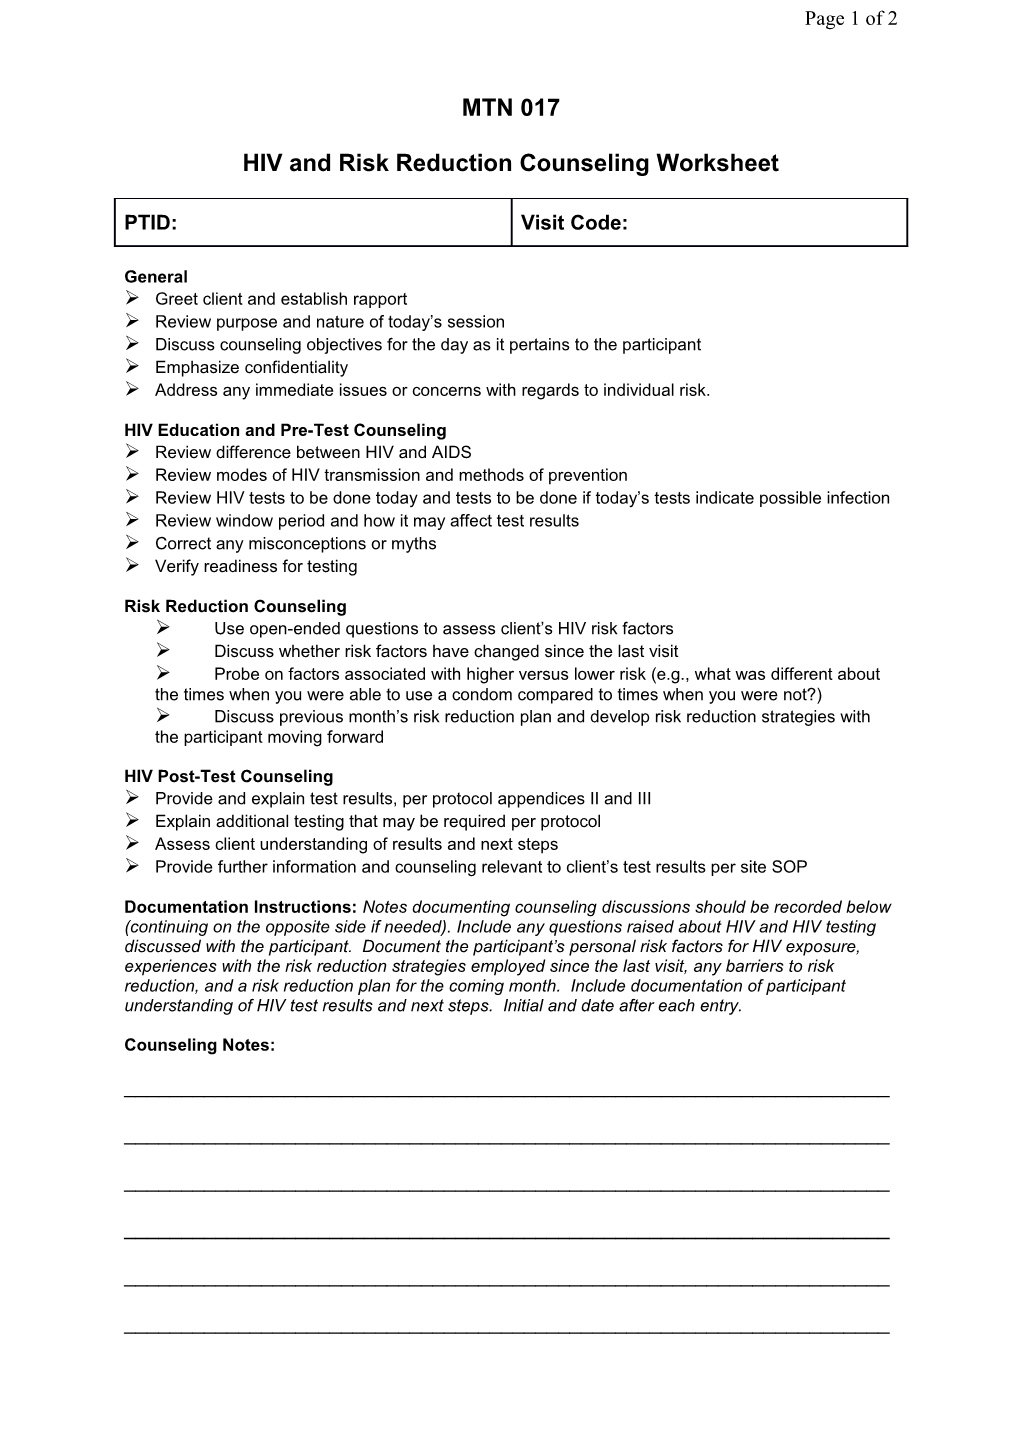 HIV and Risk Reduction Counseling Worksheet